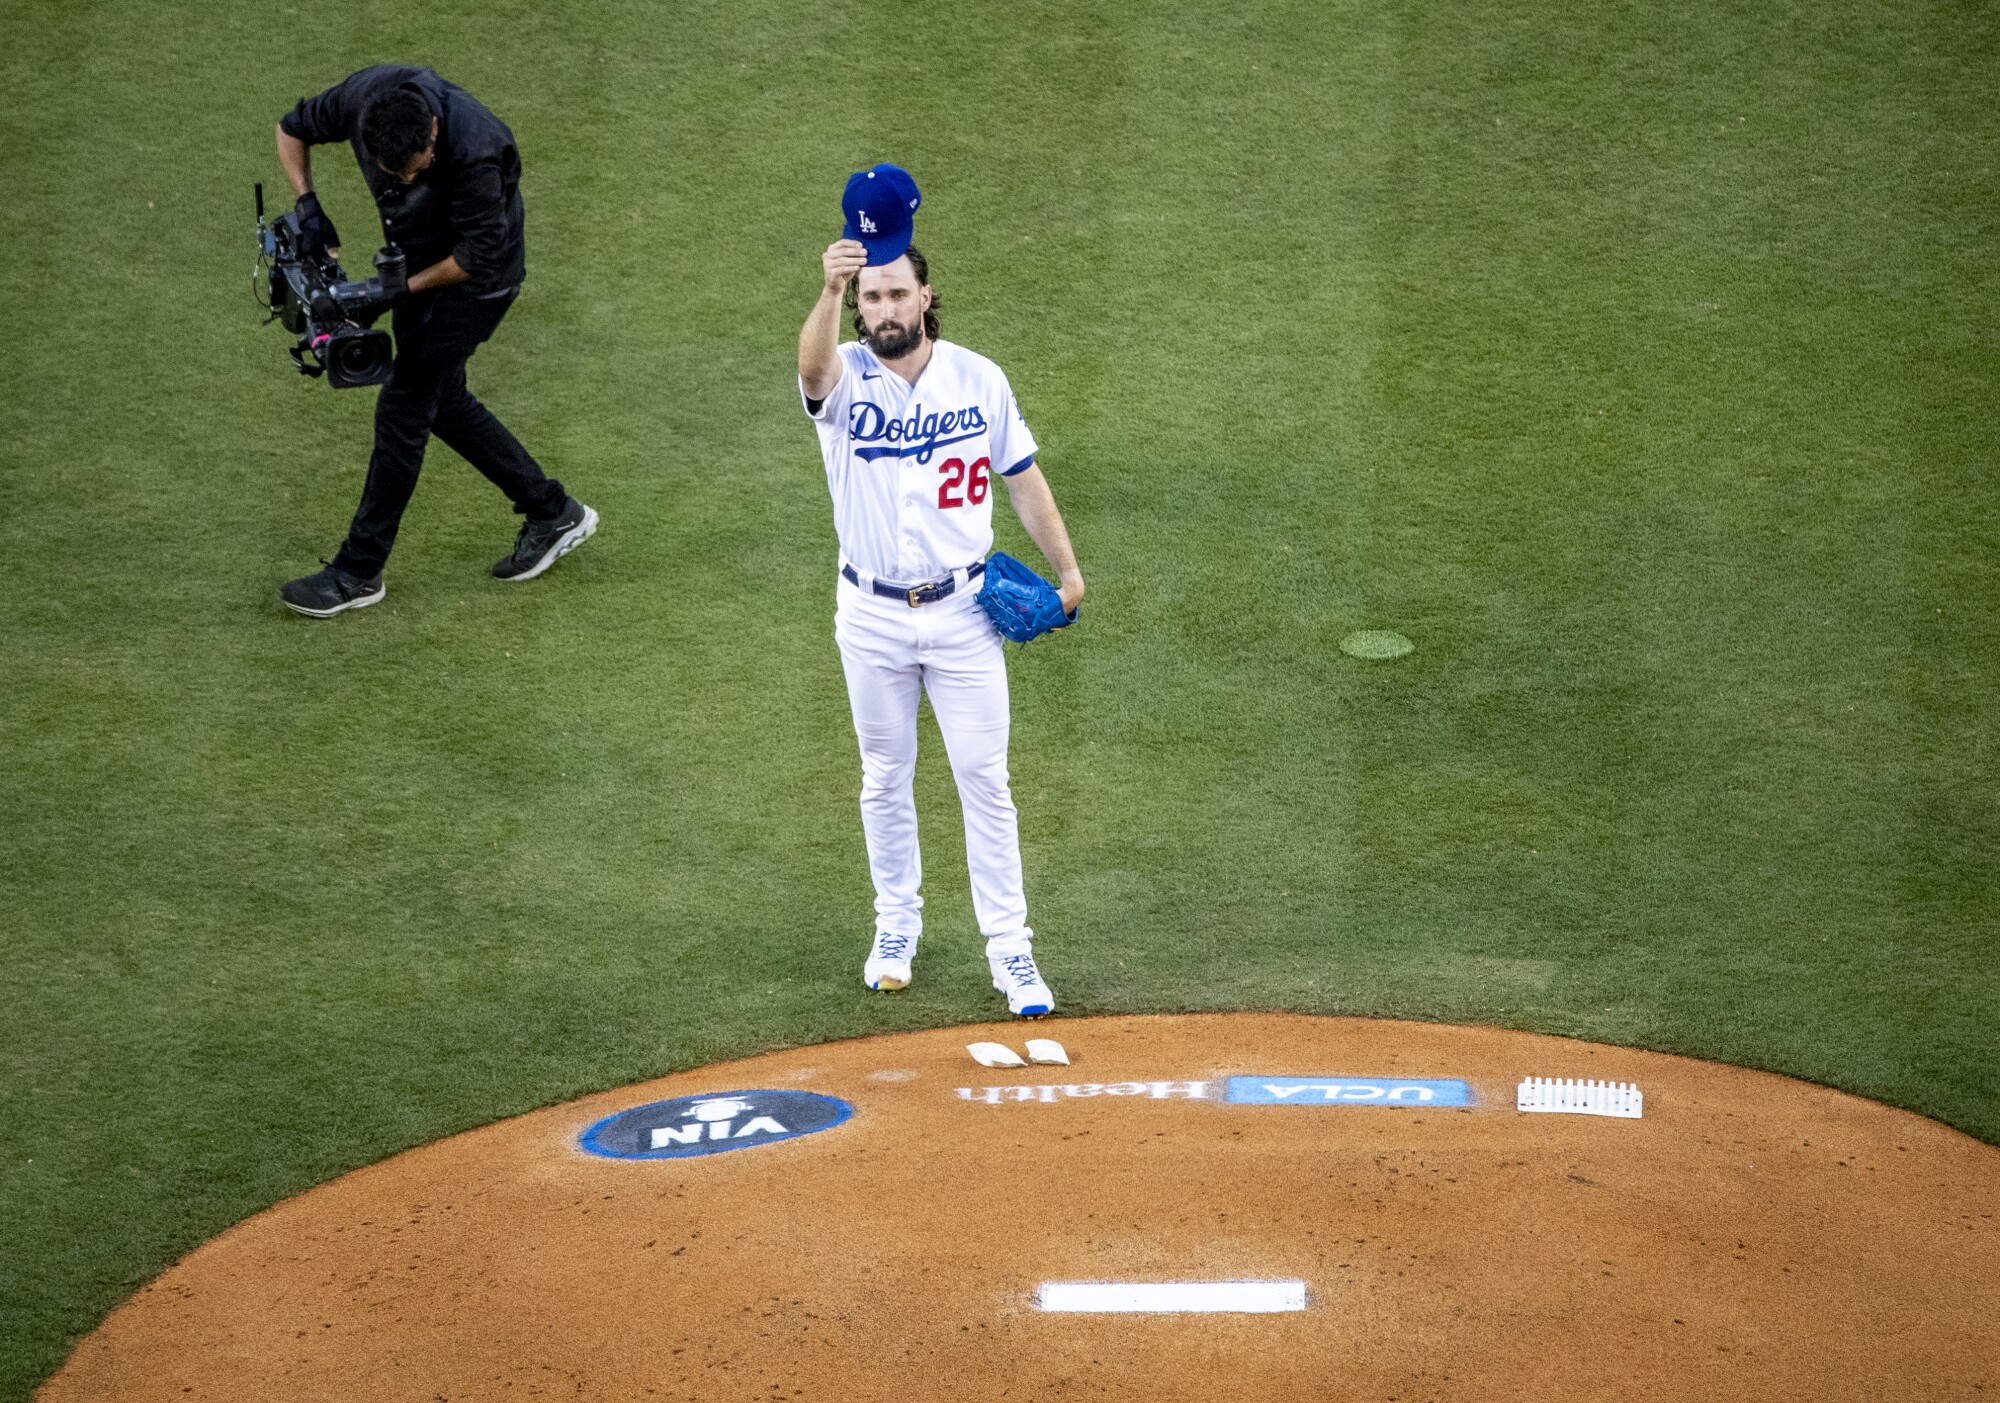 Dodgers starting pitcher Tony Gonsolin raises his cap in front of the press box in honor of Vin Scully.